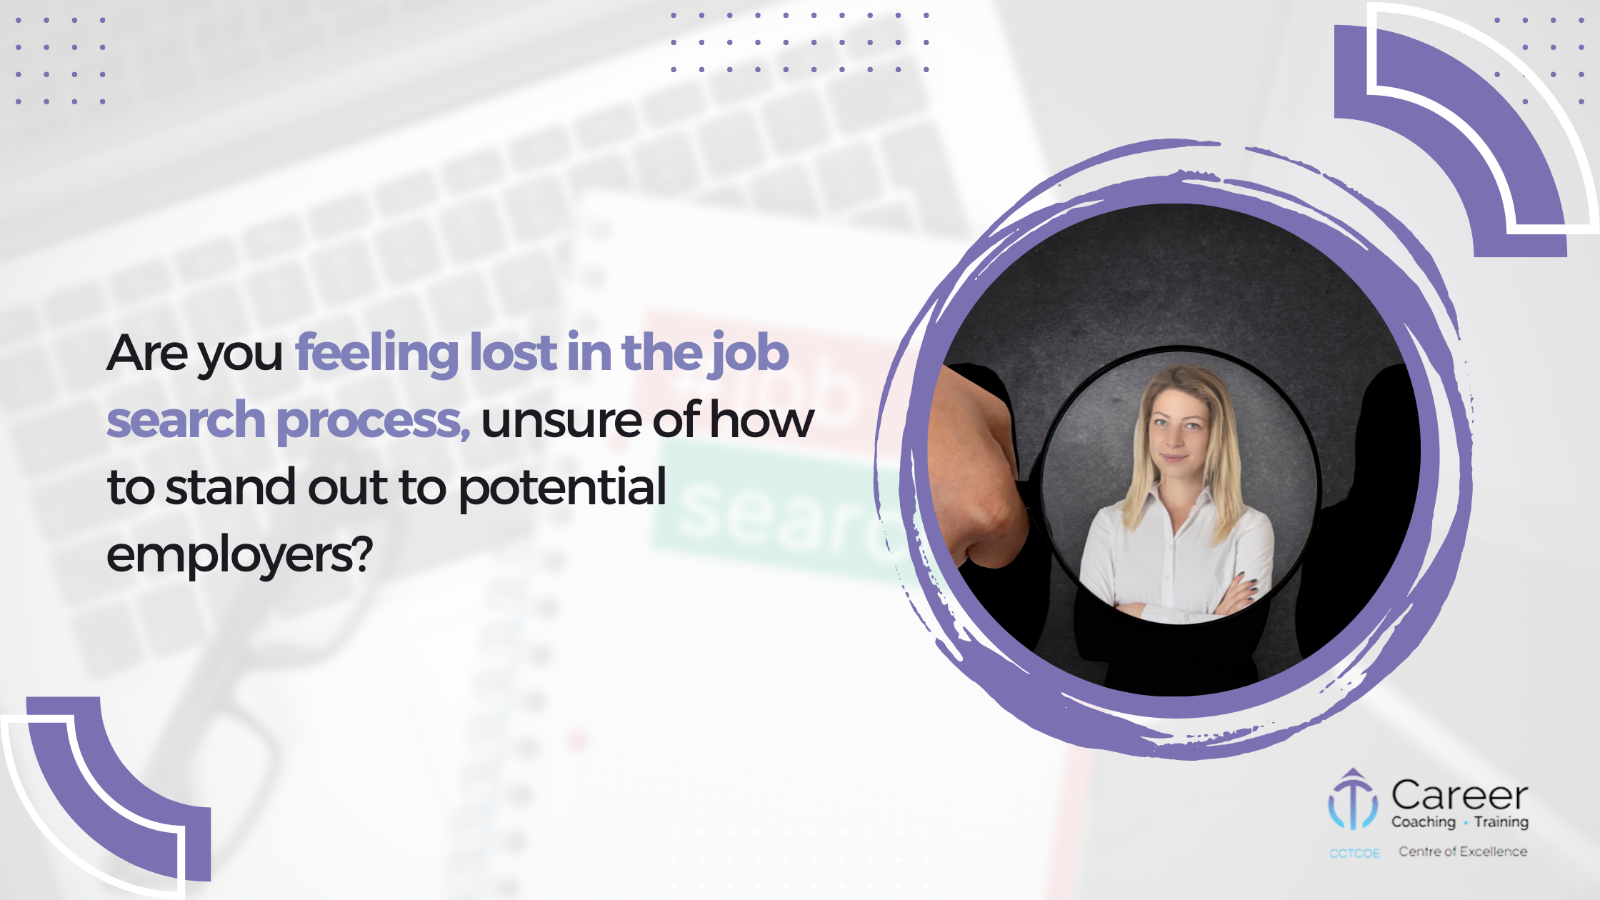 Are you feeling lost in the job search process, unsure of how to stand out to potential employers? Look no further than the "Employability Skills You Need and Employers Want" online course. In this comprehensive and insightful program, you will learn to pinpoint your key employability skills and highlight them in your job applications and interviews. You will also have the opportunity to evaluate and improve upon any gaps in your skill set, allowing for steadfast career growth. Do not let yourself be left behind in today's competitive job market - enhance your employability skills with this invaluable course.